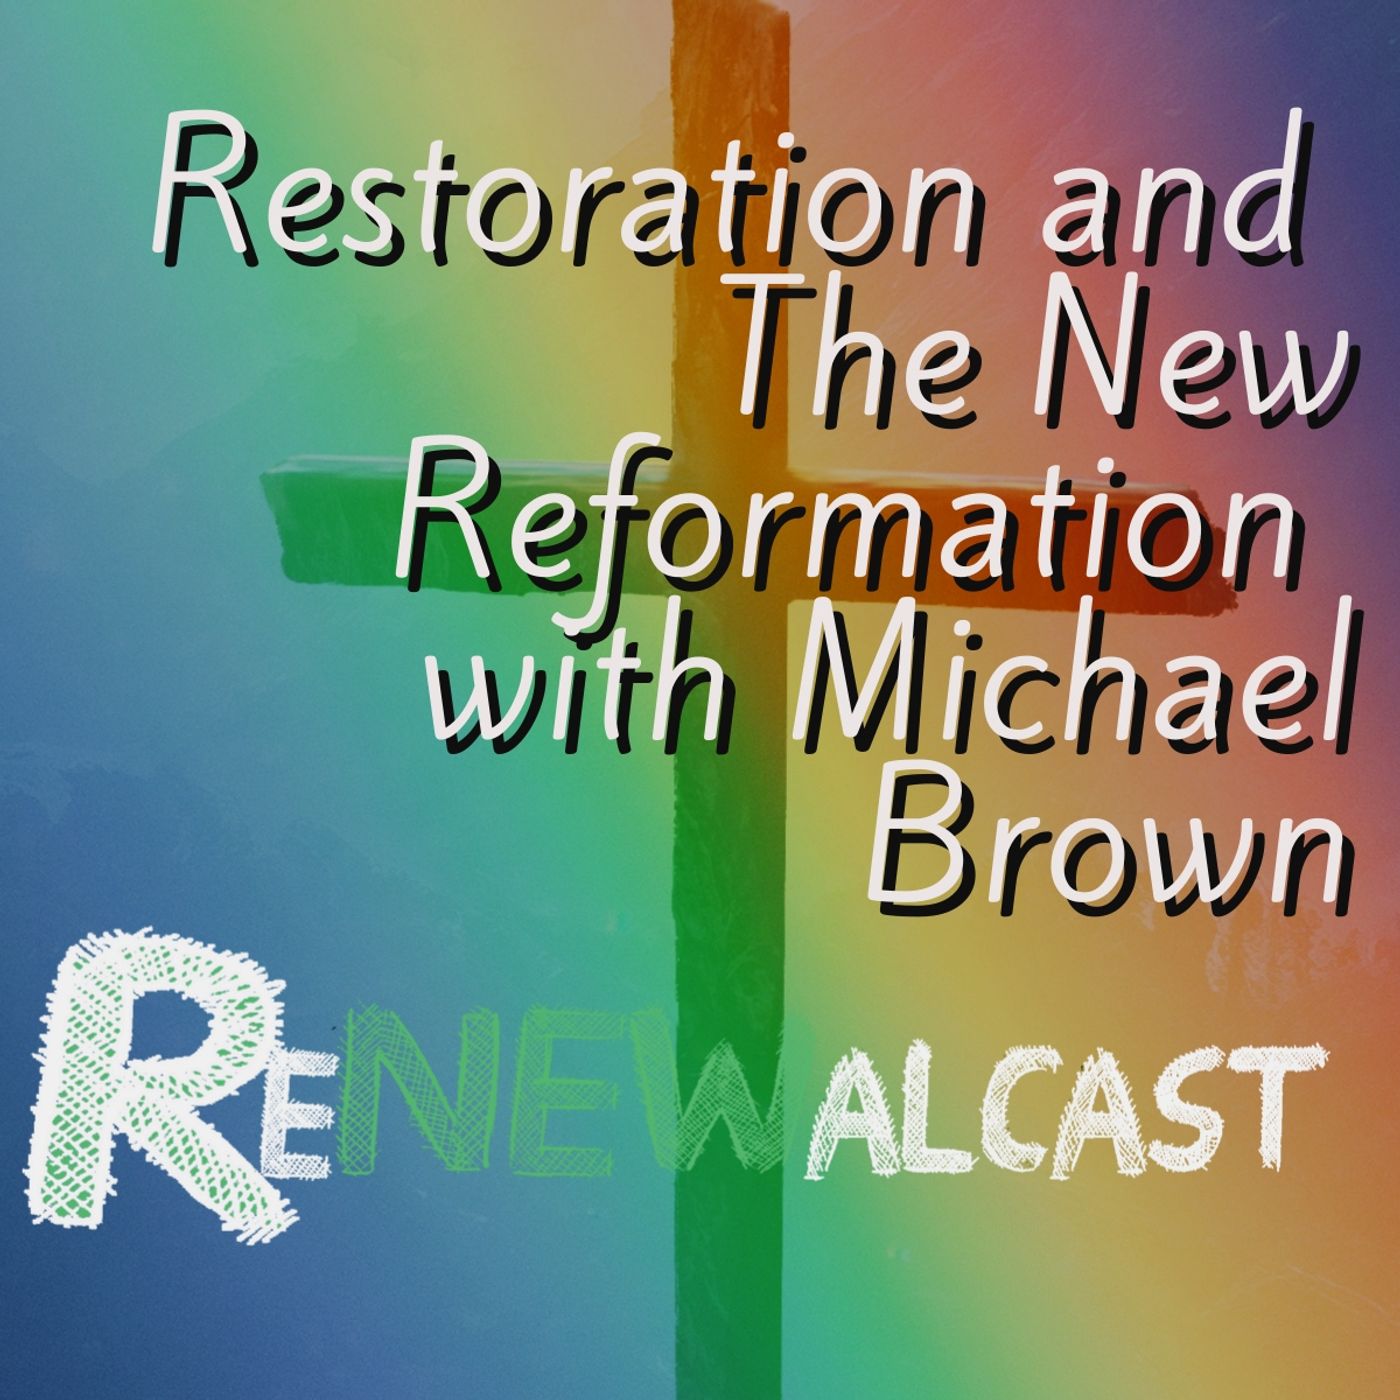 Restoration and the New Reformation With Michael Brown